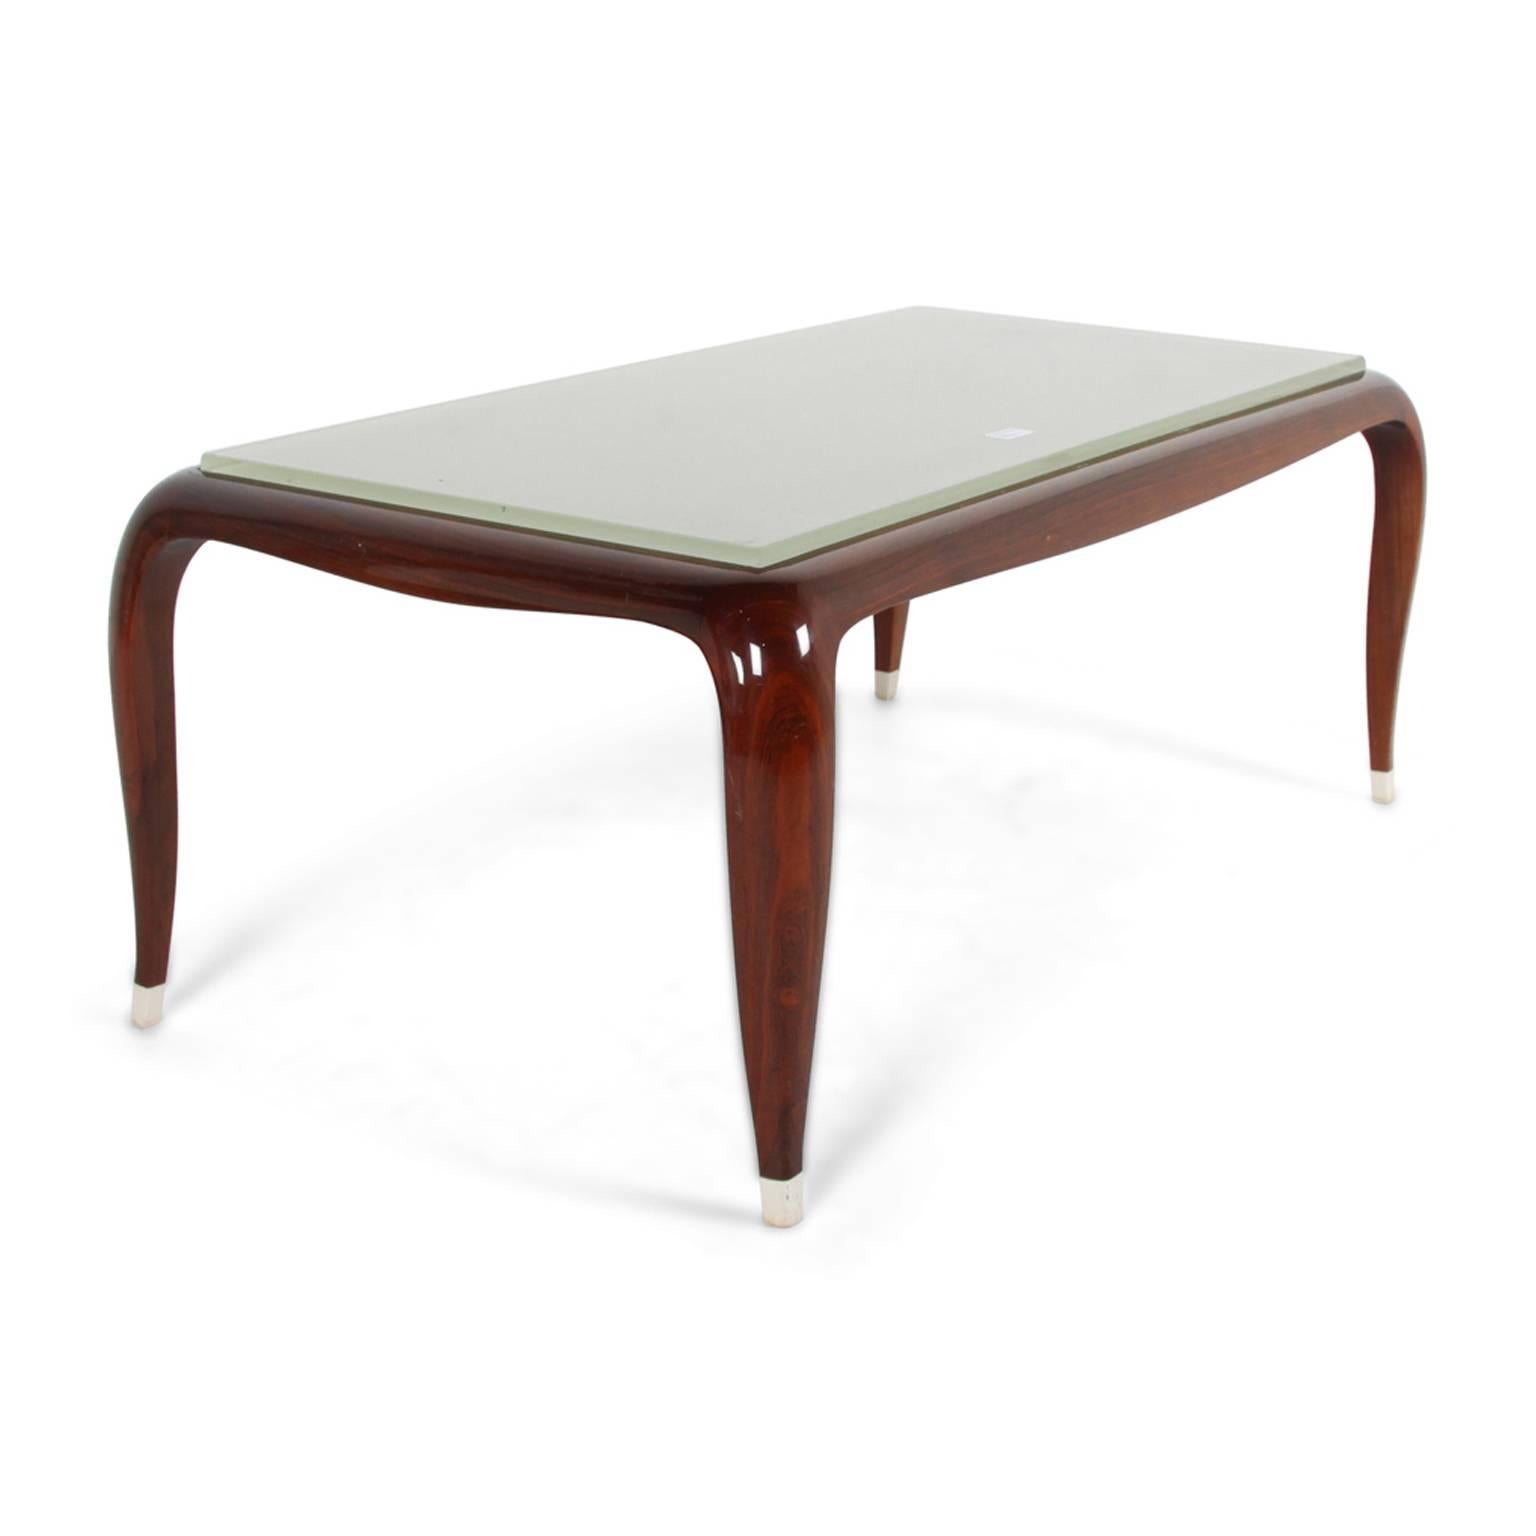 An elegant French Art Deco-style coffee table in rosewood, with faux ivory feet and an etched glass top. Circa 1960.



